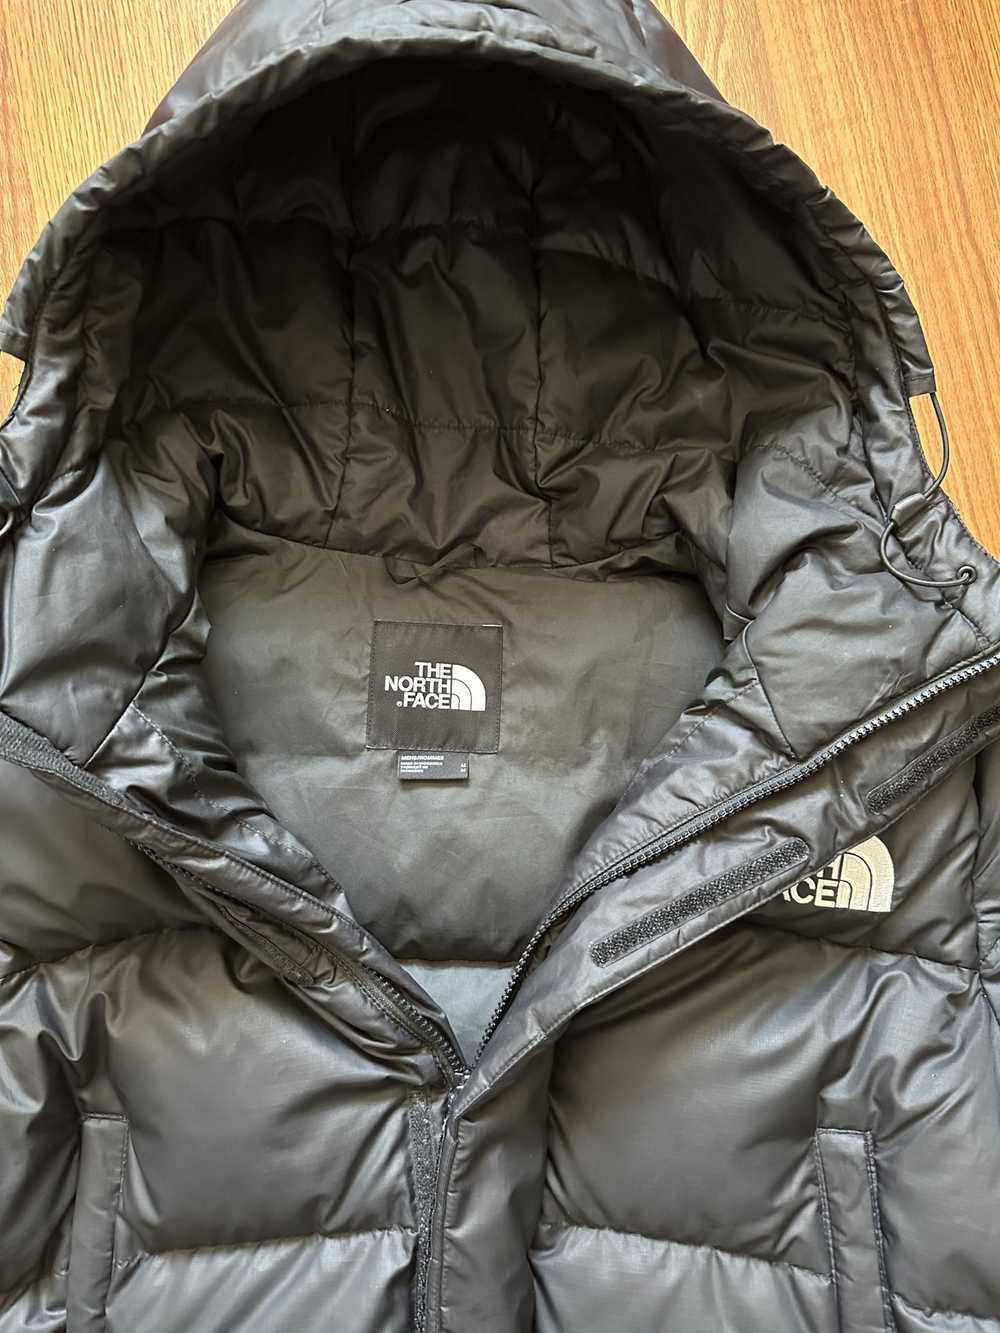 The North Face The North Face Himalayan Parka - image 4